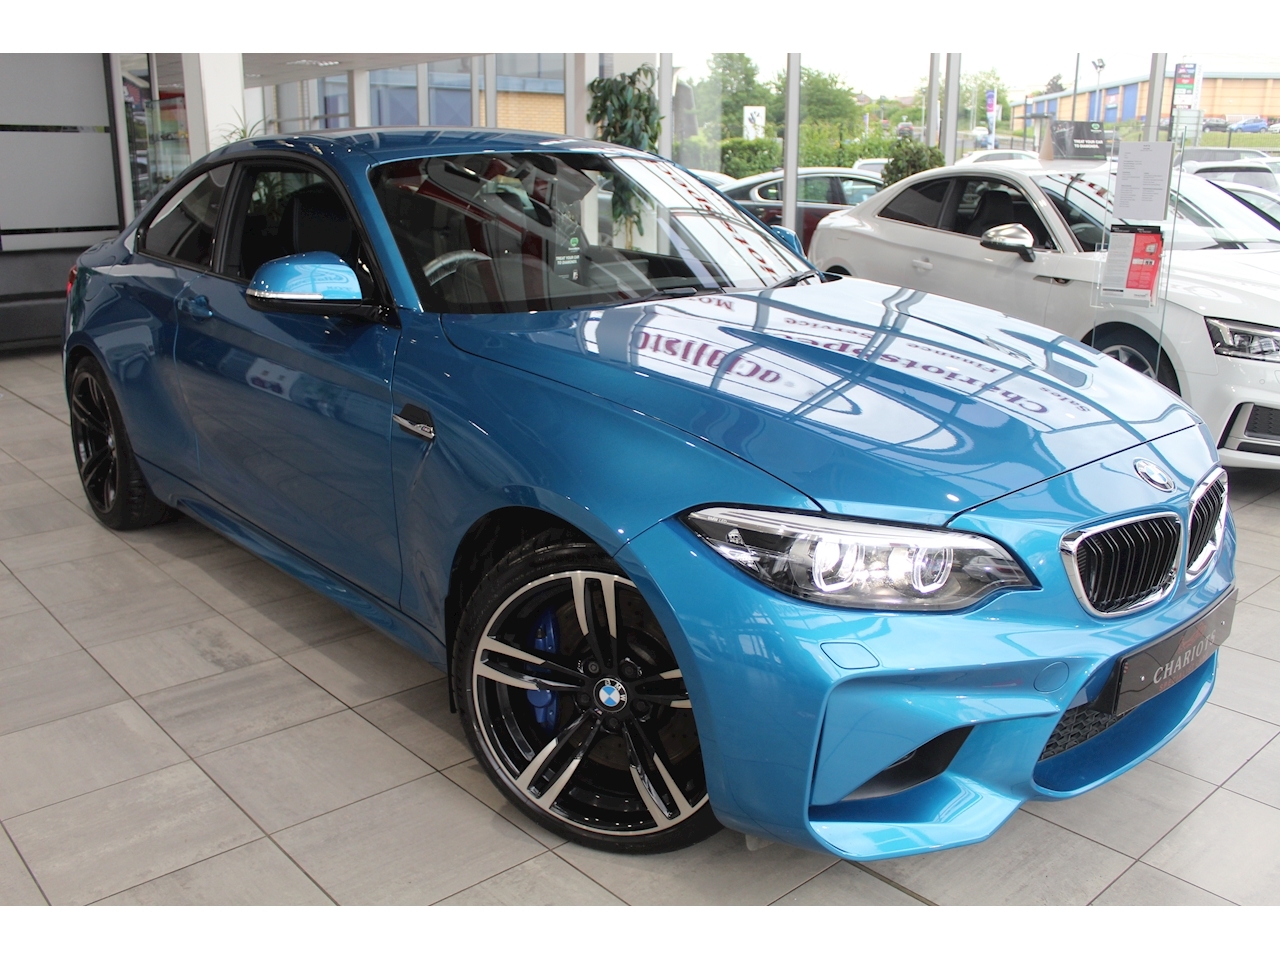 3.0i Coupe 2dr Petrol DCT (s/s) (370 ps)